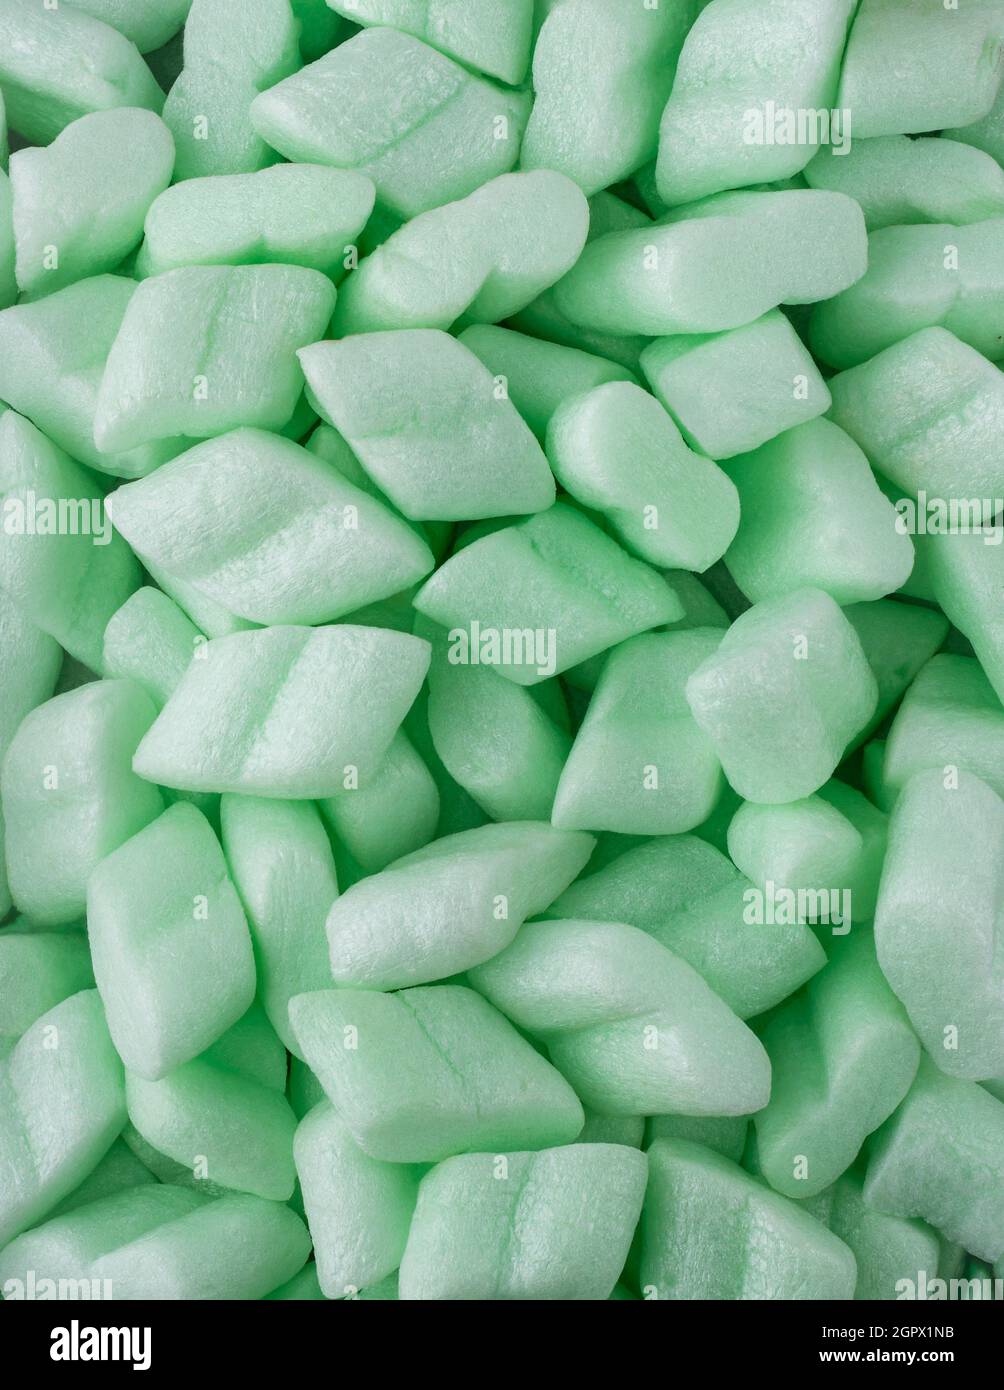 styrofoam packaging chips or peanuts, closeup of light weight green packing and cushioning material background texture Stock Photo